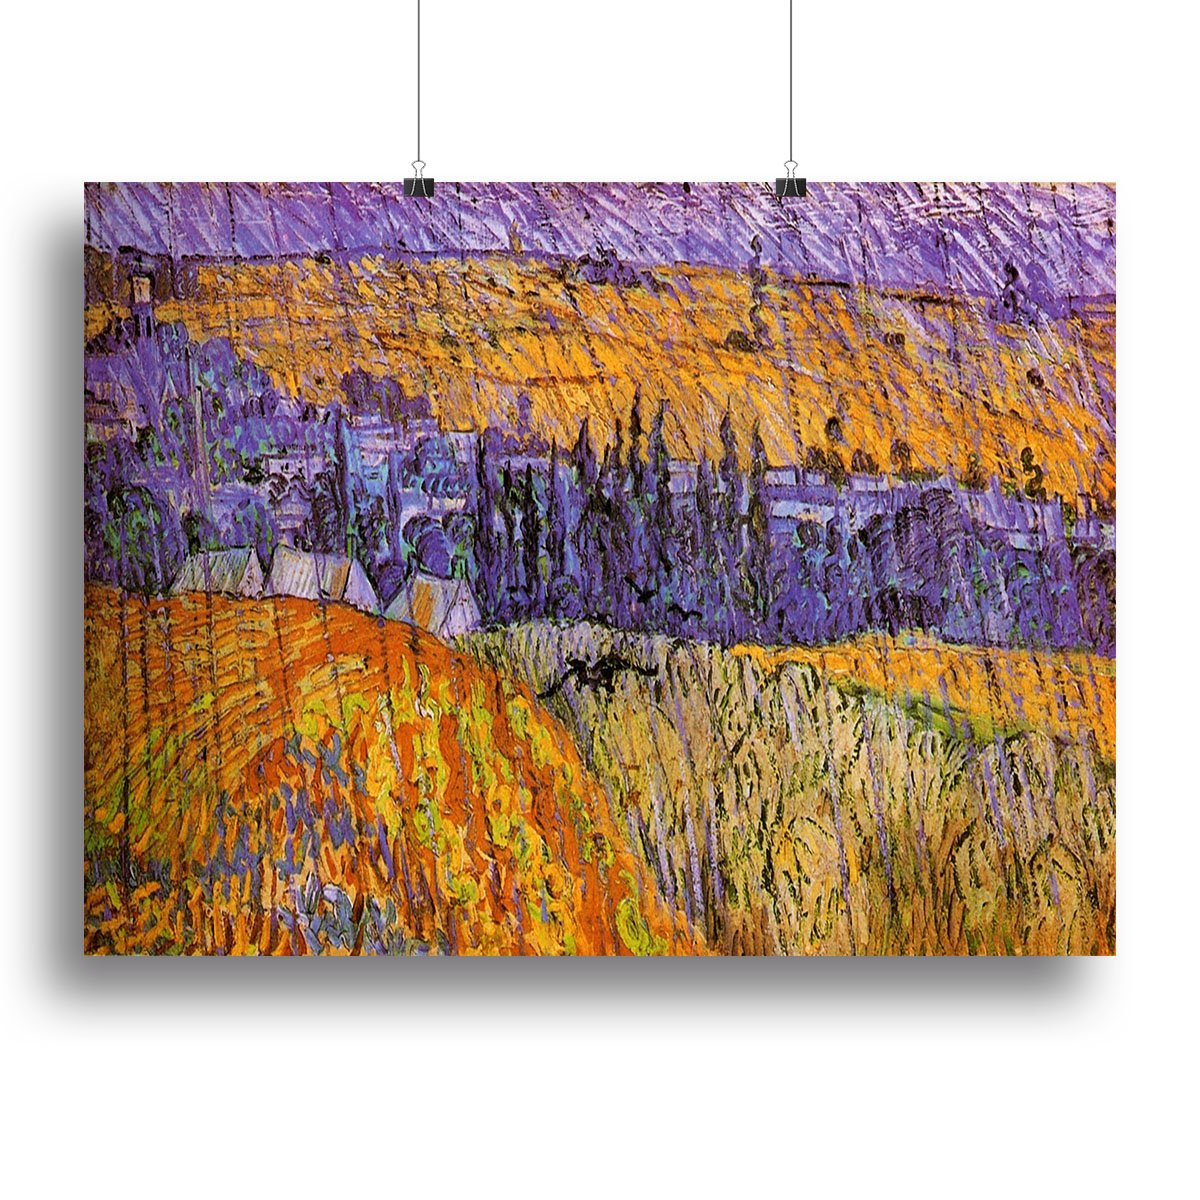 Landscape at Auvers in the Rain by Van Gogh Canvas Print or Poster